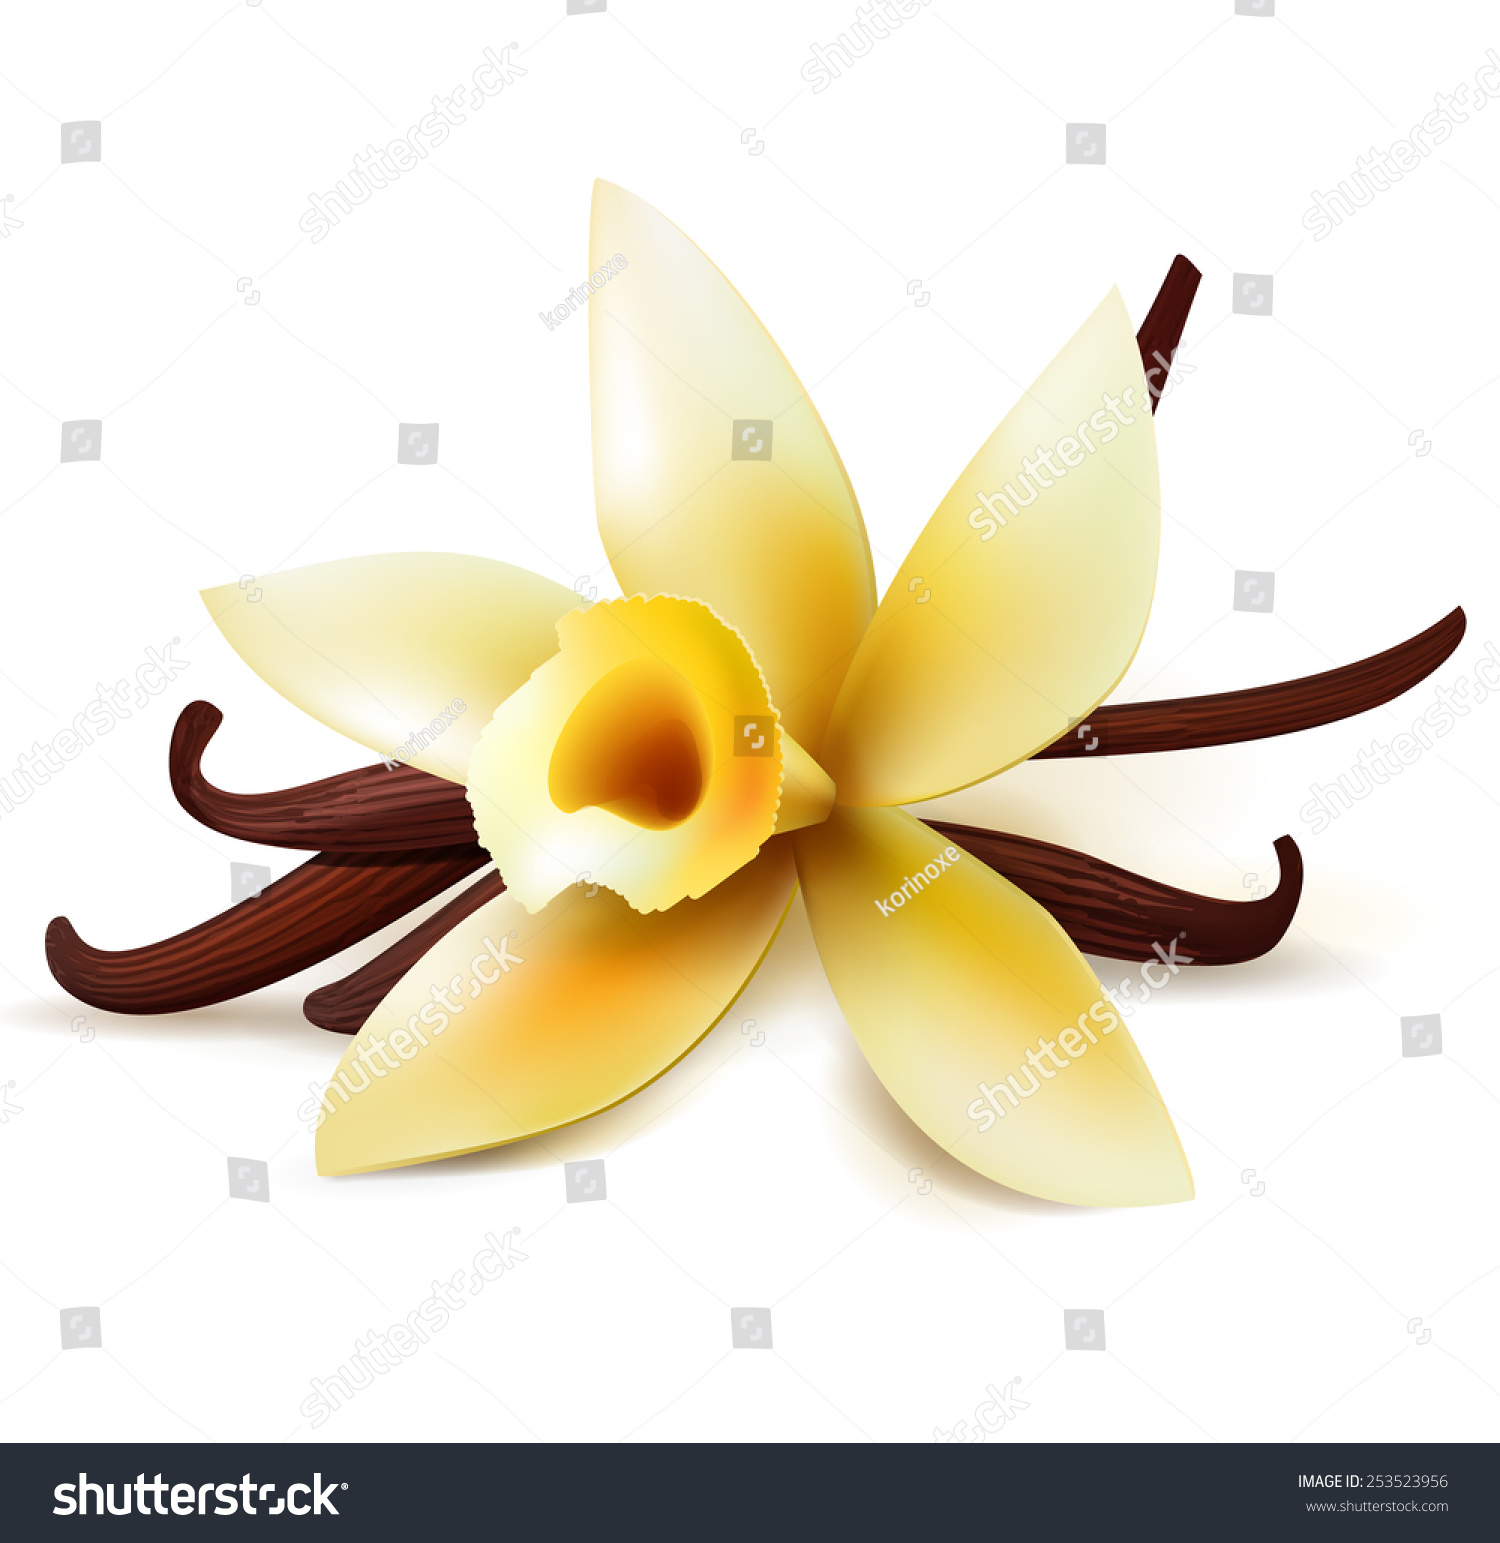 Realistic vanilla flower and pods, vector isolated objects on white background #253523956